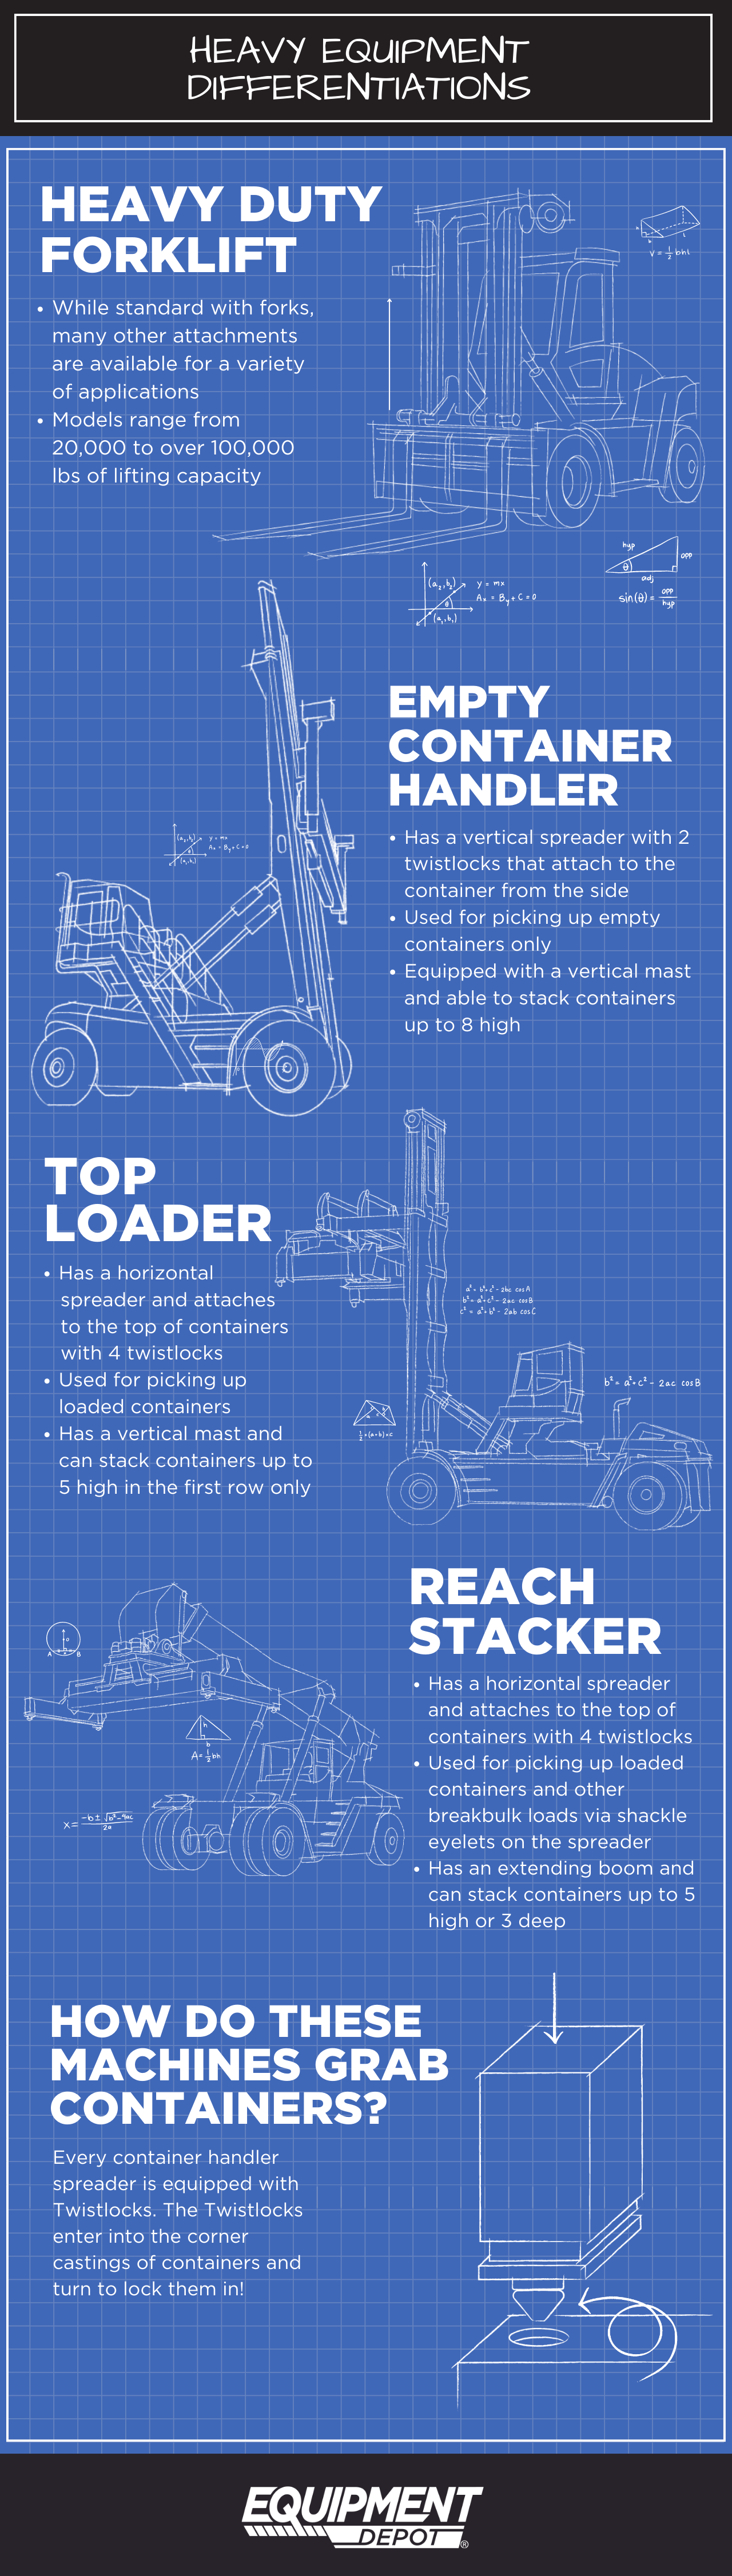 Heavy-Equipment-Differentiations-Infographic